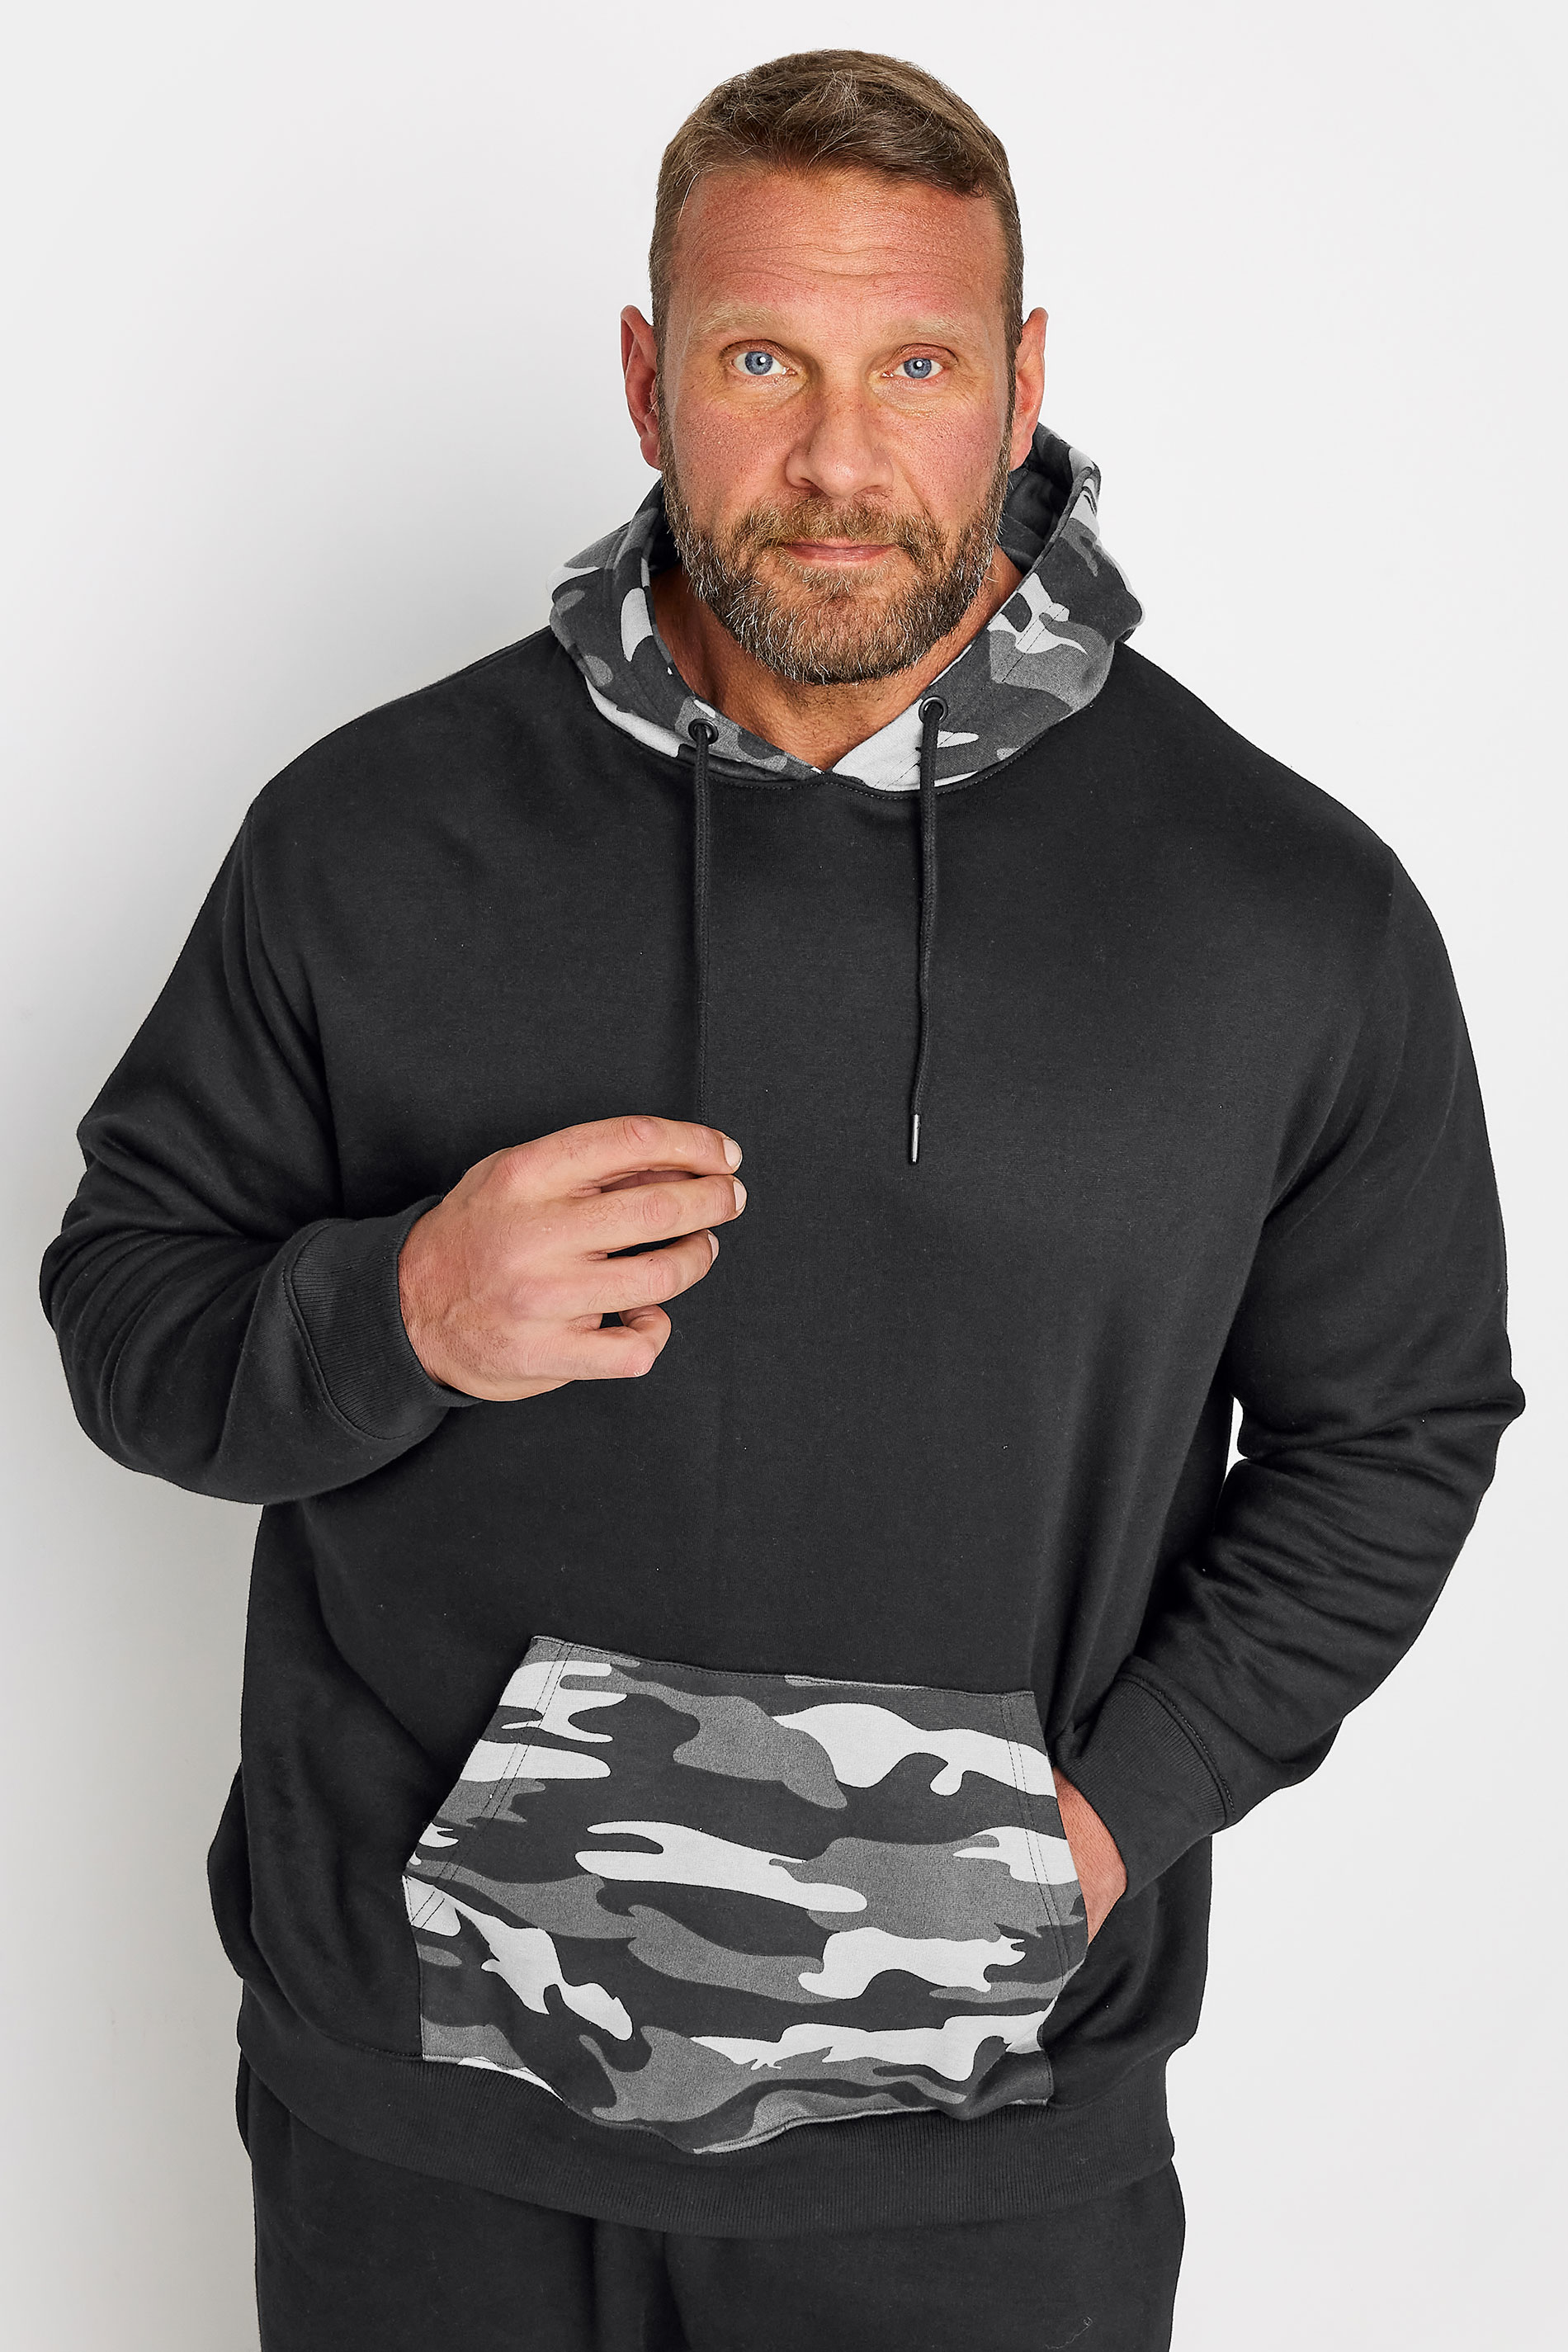 Hooded sweatshirt with oversized colour-matched camouflage embroidery